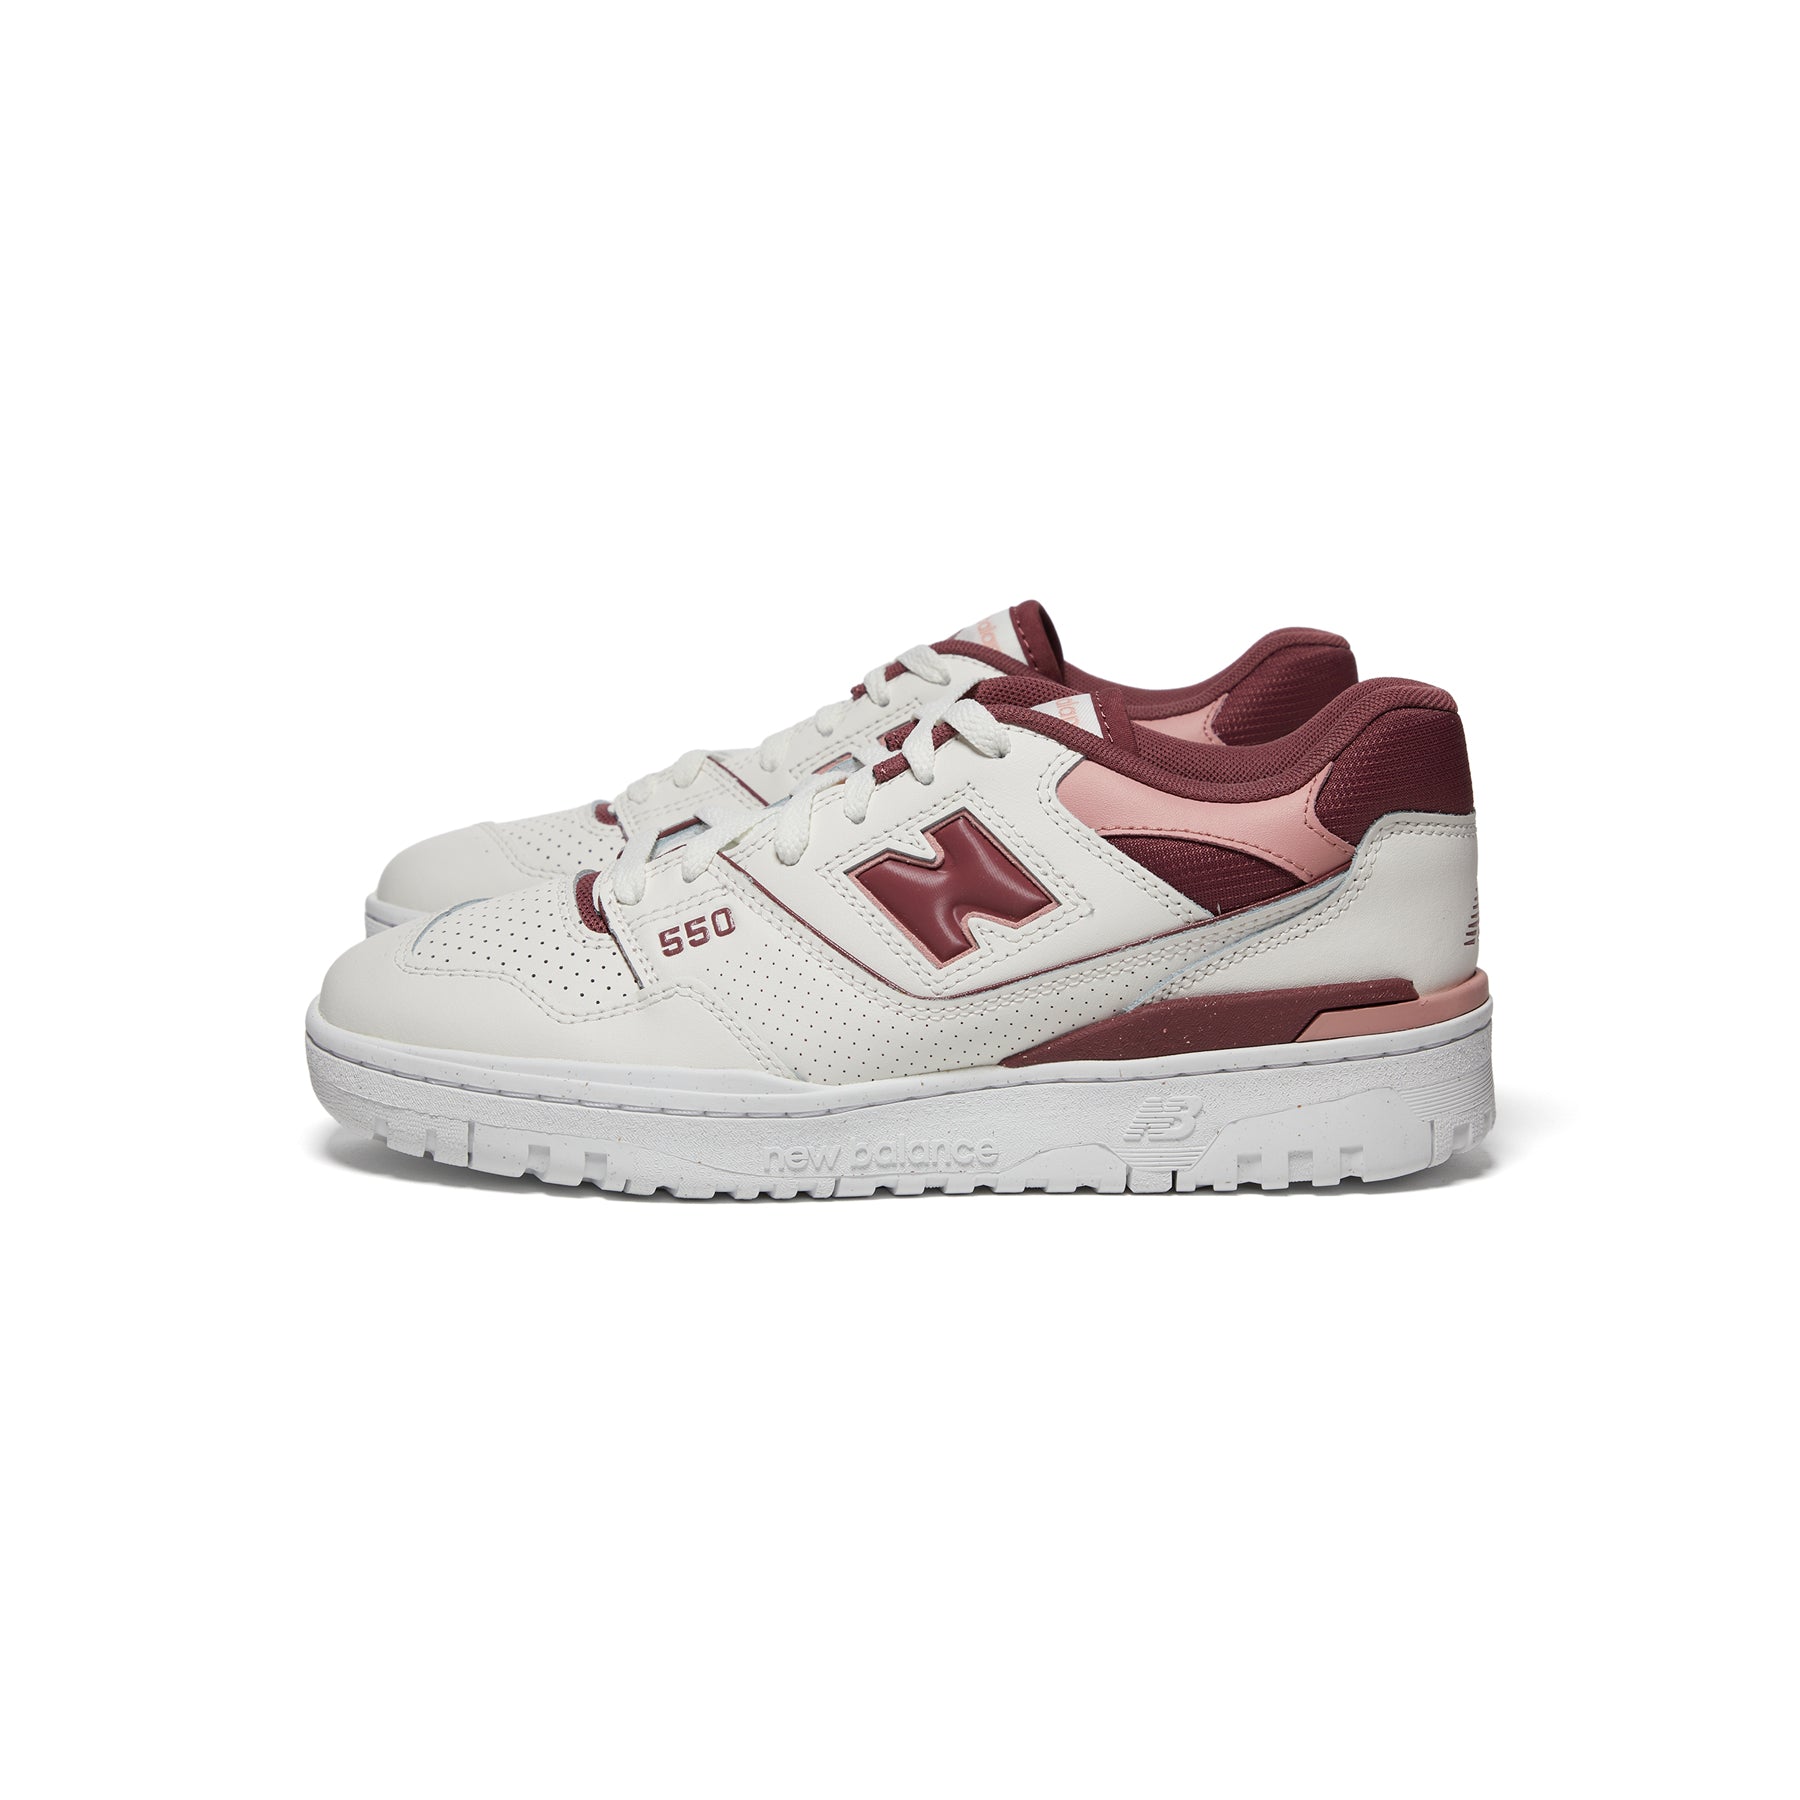 New Balance Women's 550 - White/Red/Pink (Size 5.5)